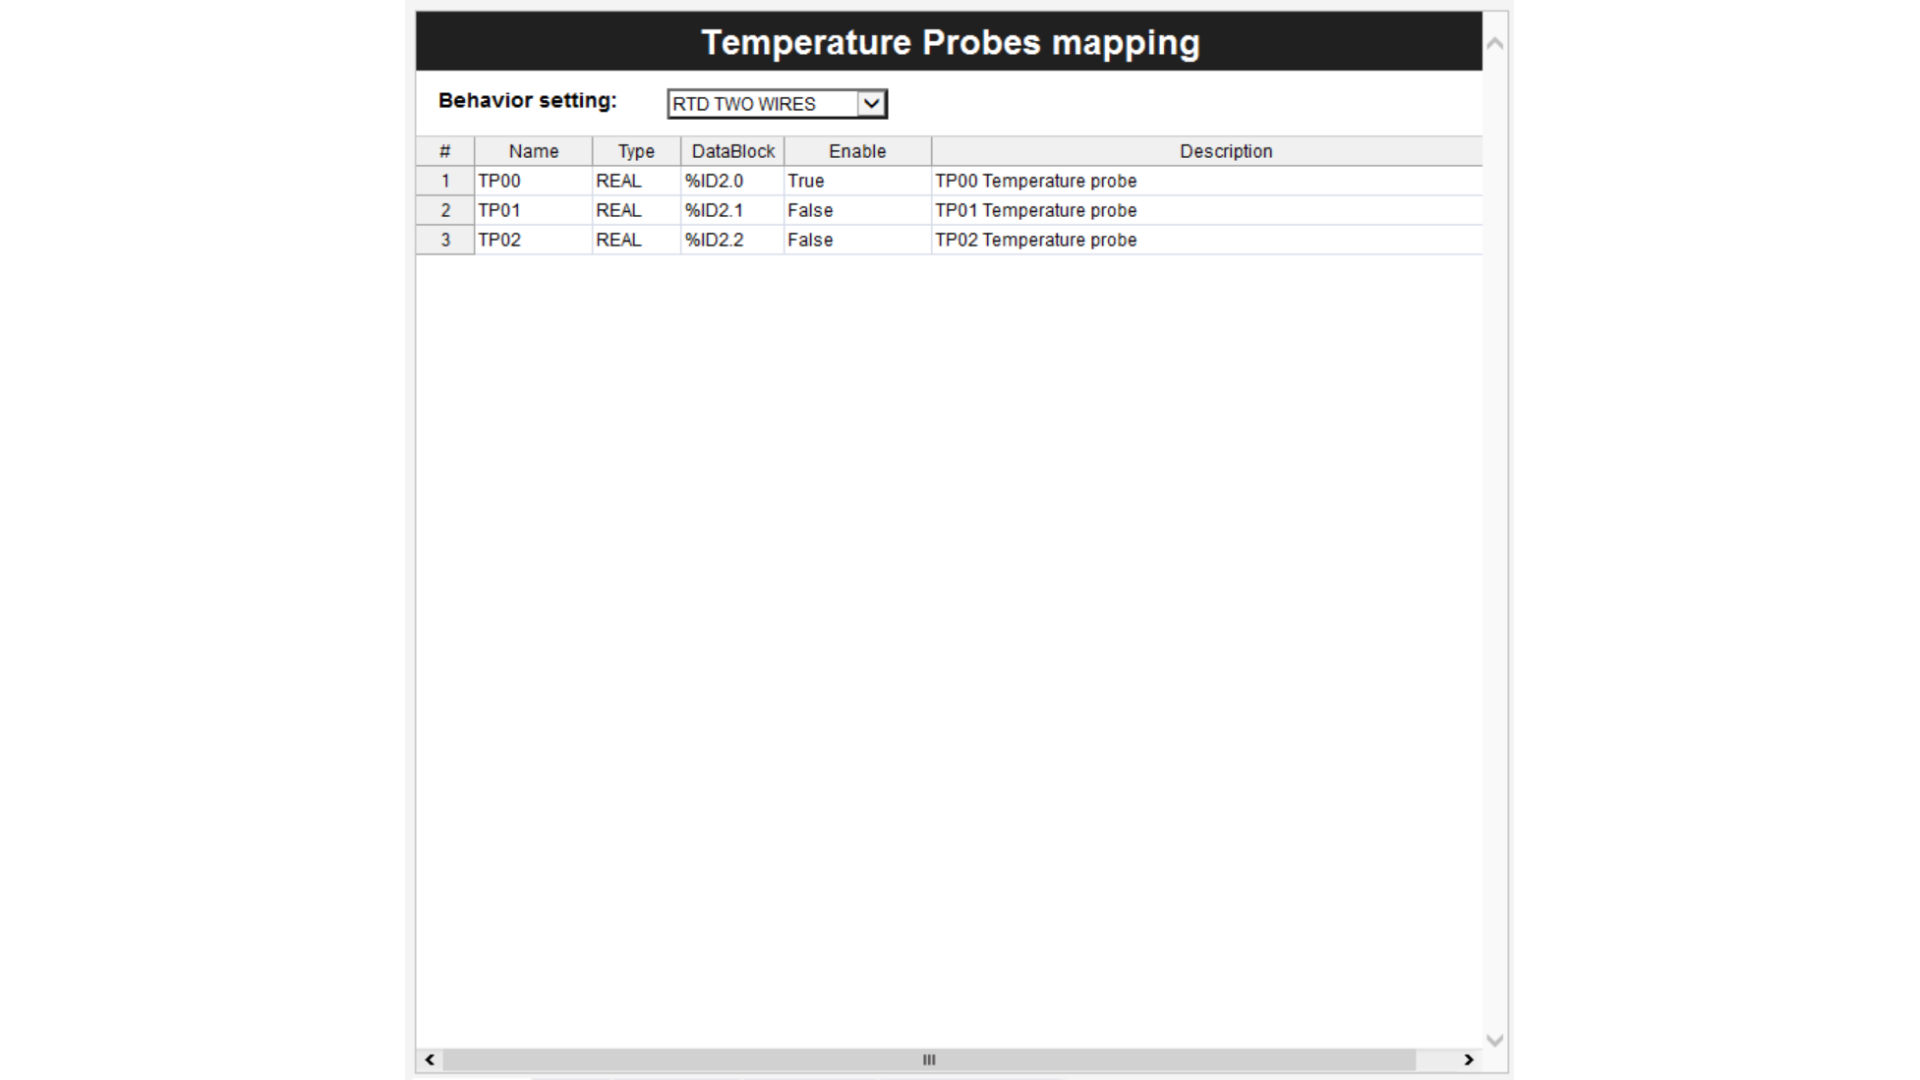 Temperature Probes Mapping